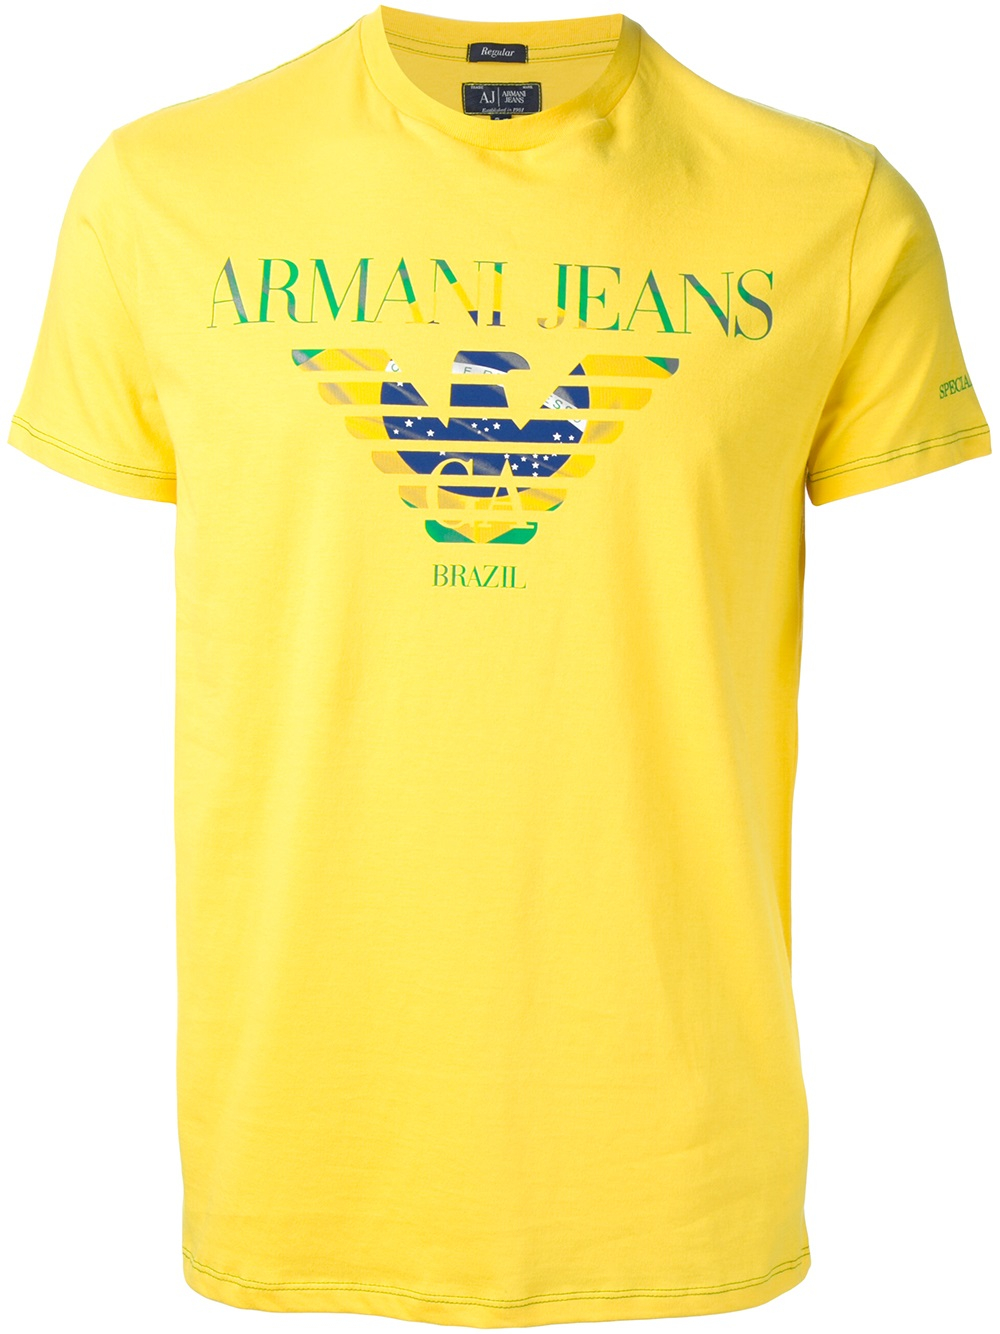 Armani Jeans Usa World Cup Tshirt in Yellow & Orange (Yellow) for Men ...